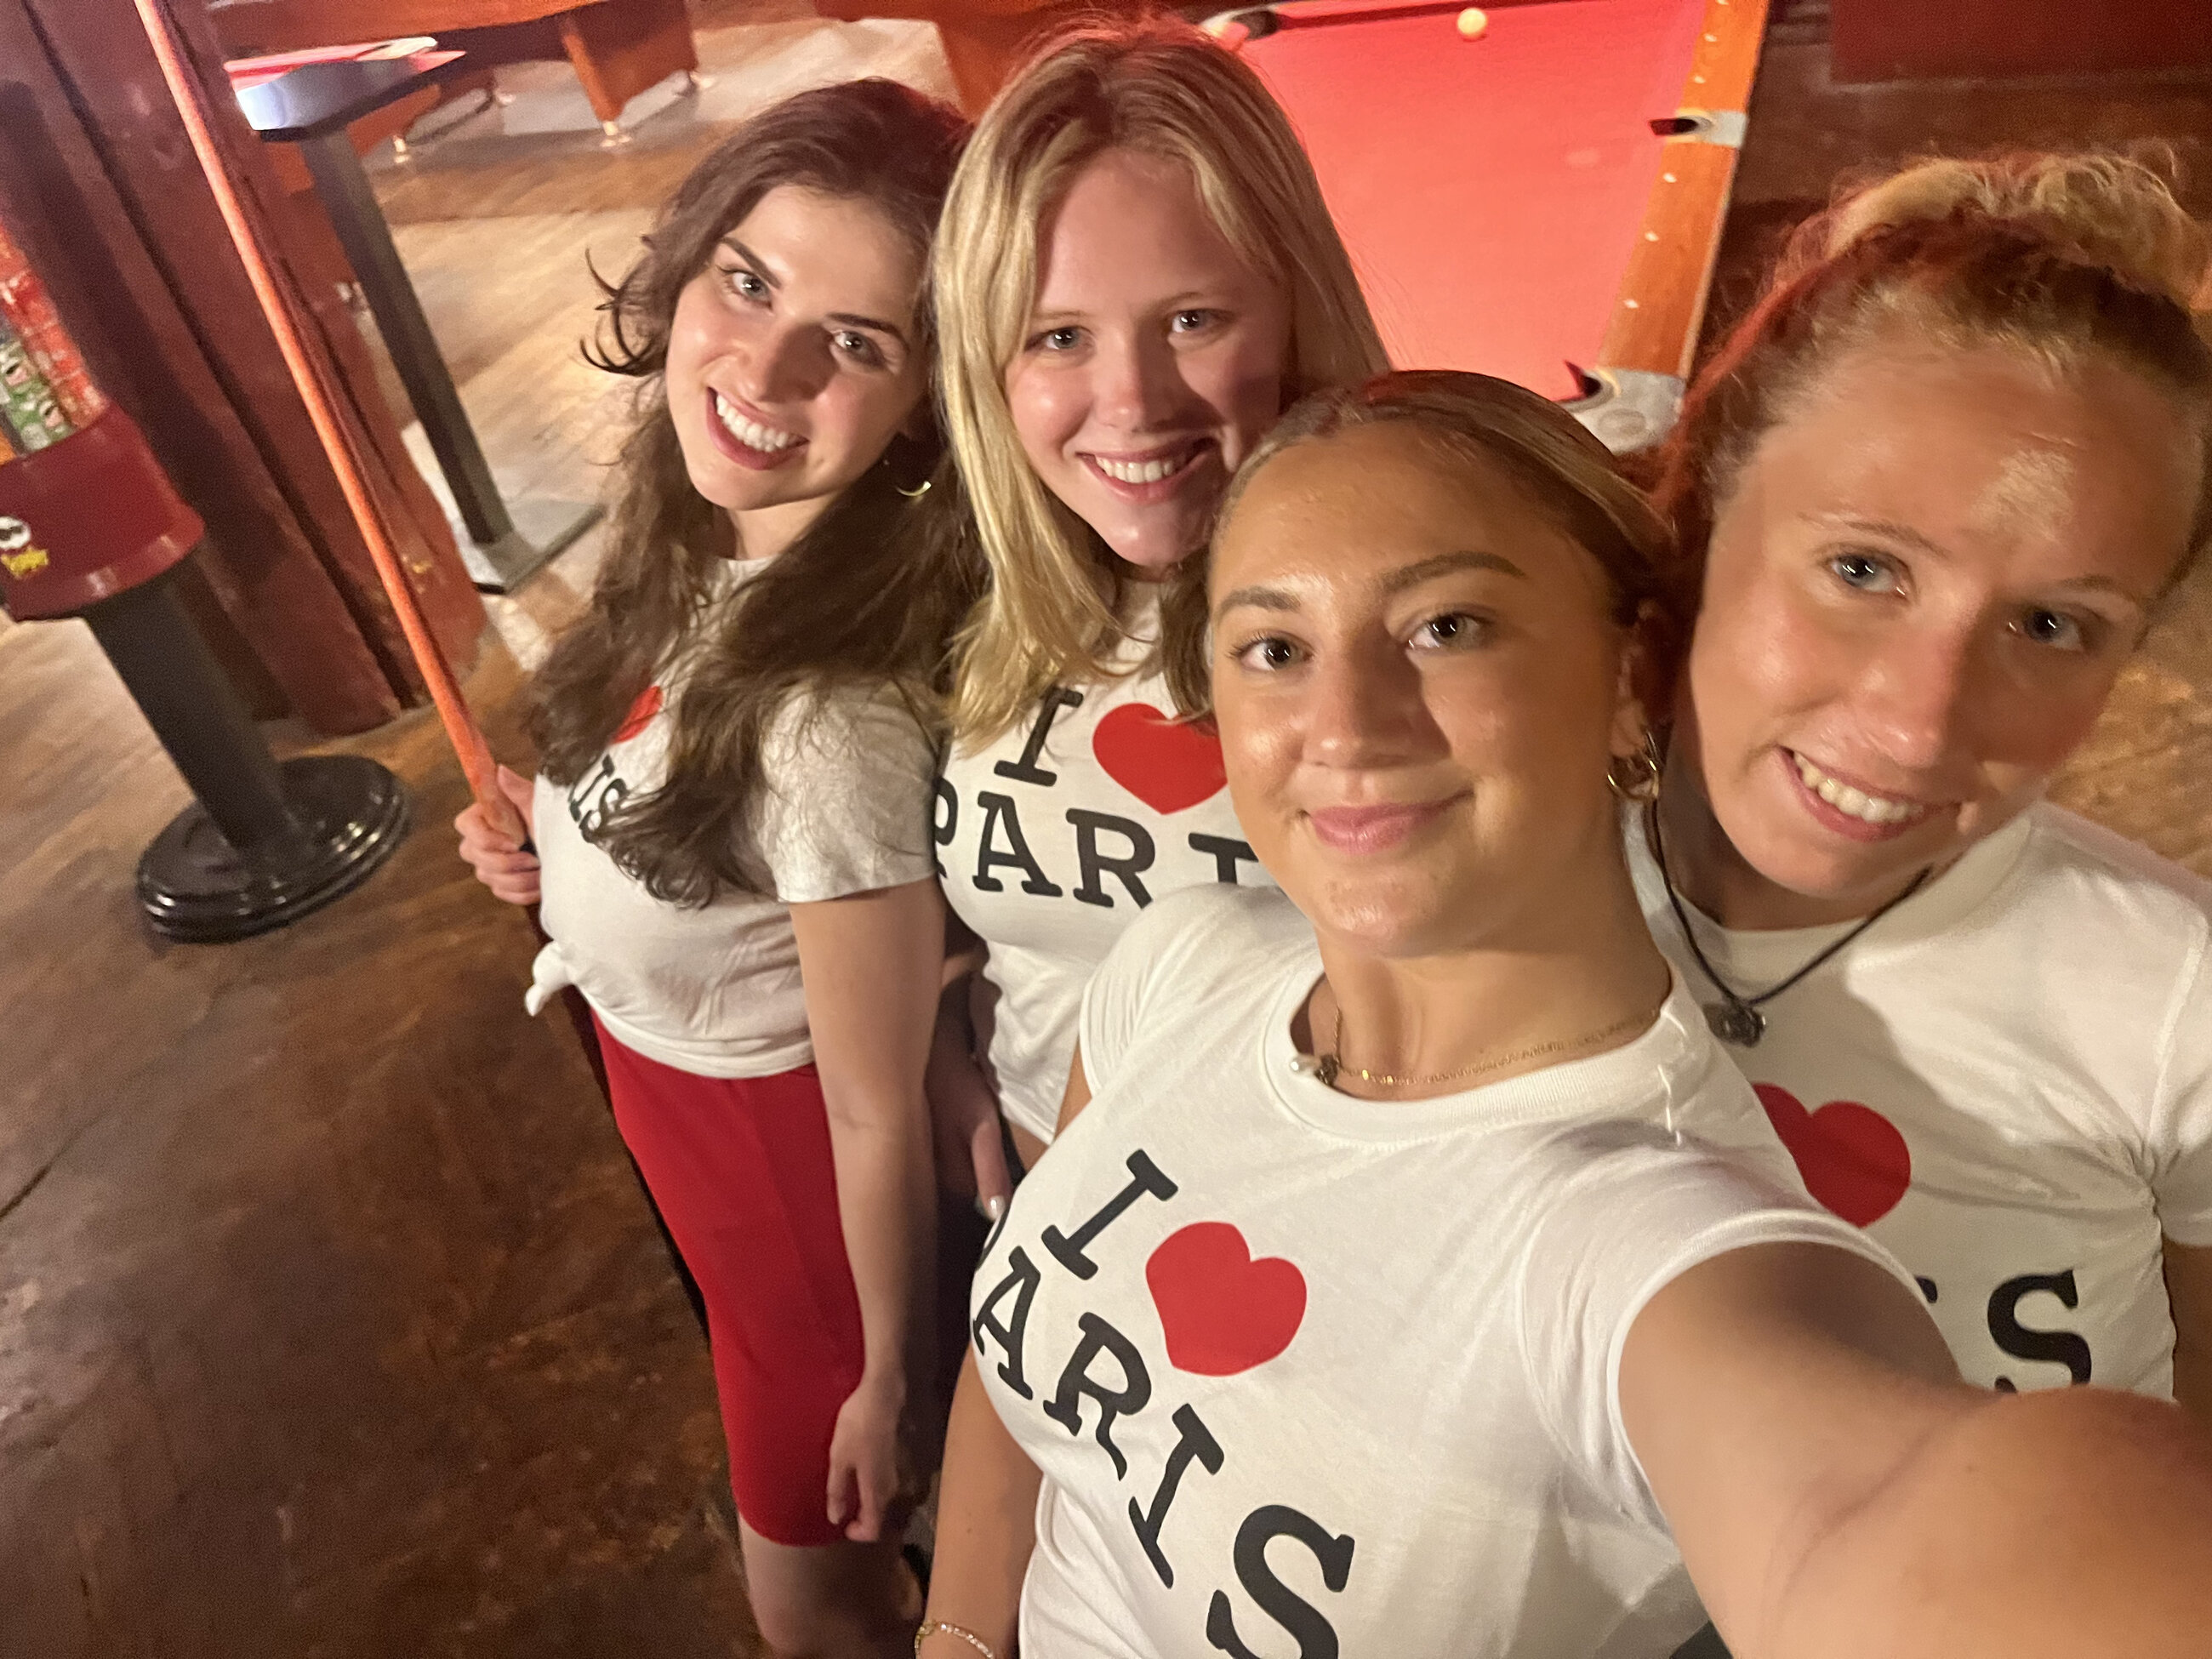 this was our last night in paris we all got these i <3 paris shirts and went out. these are the girls i got so close with during our program